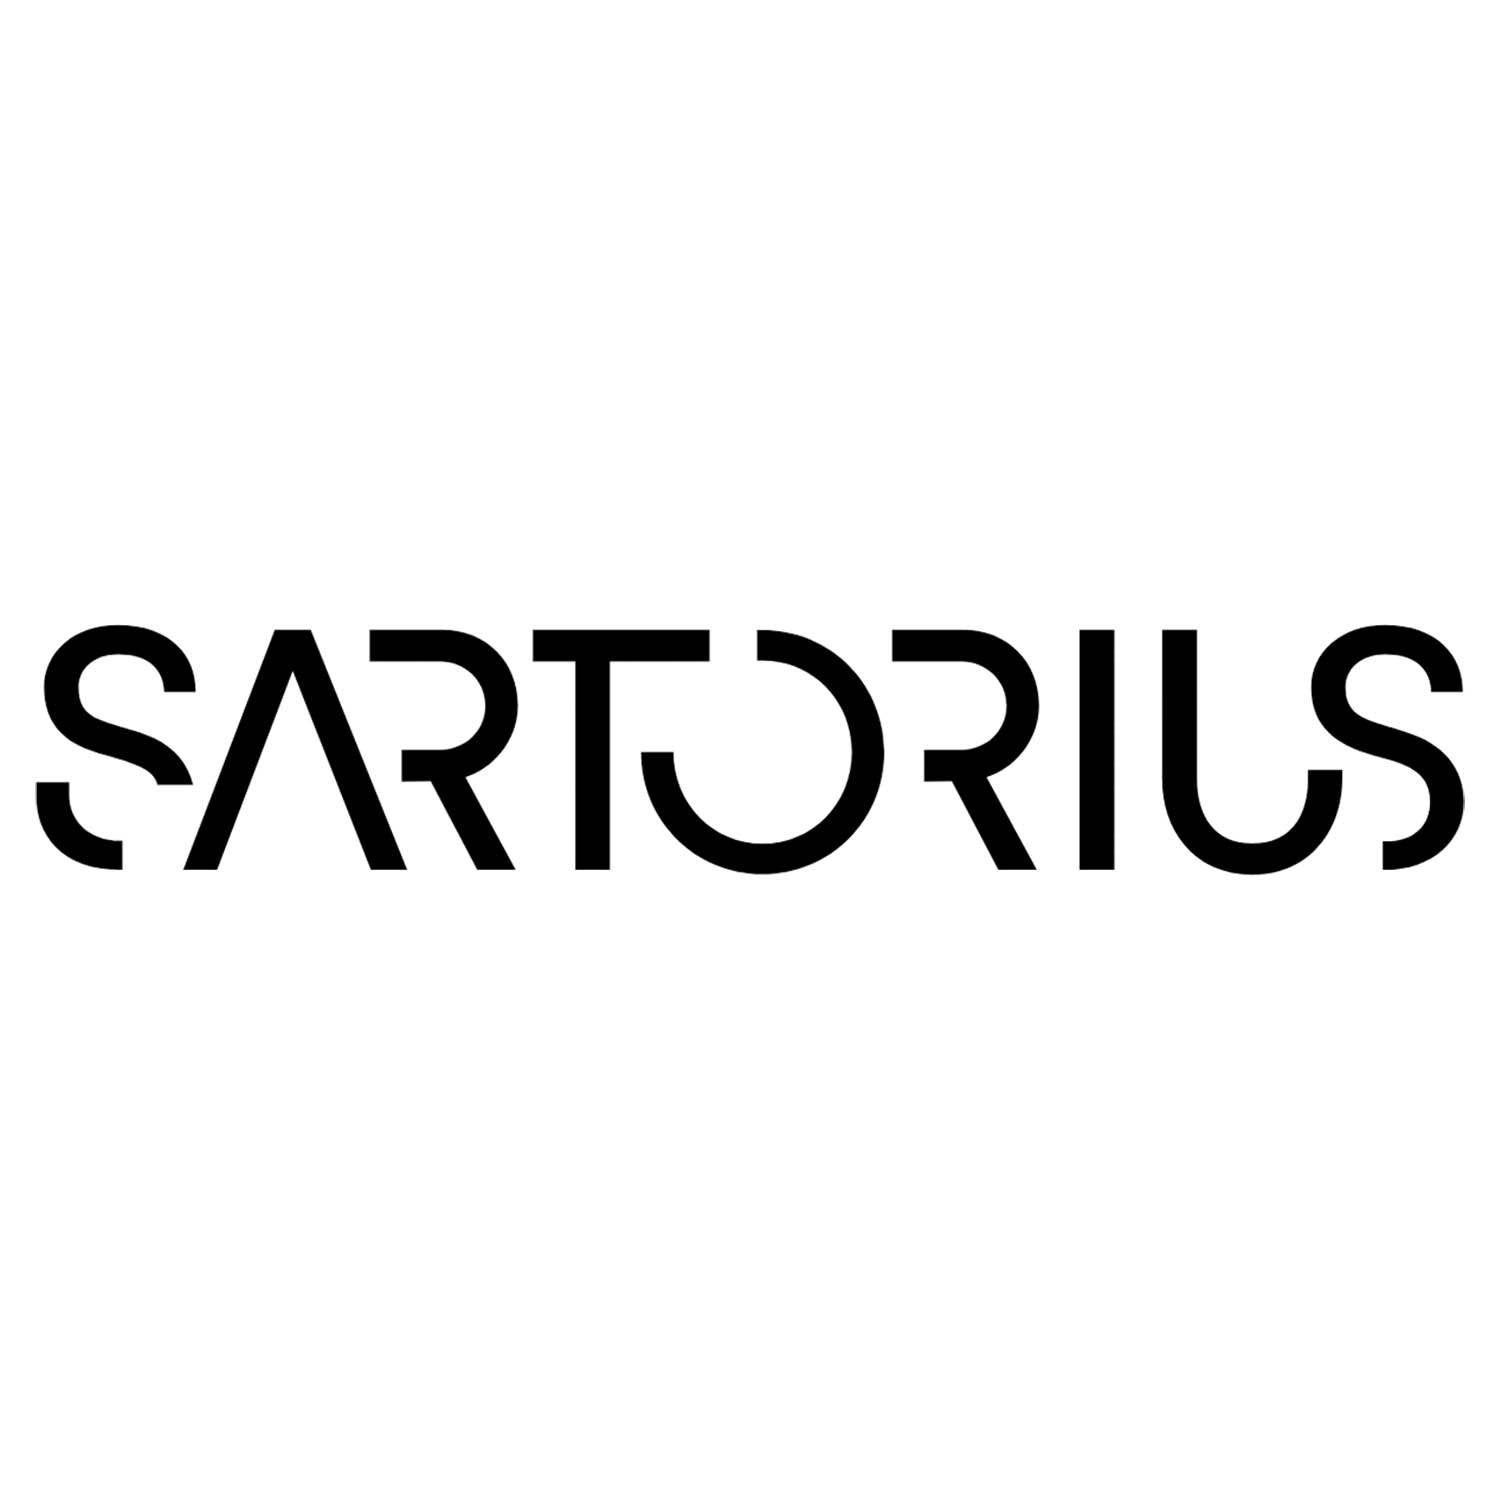 Sartorius FT-4-328-270, Technical Papers, Smooth/ Grade 100/N